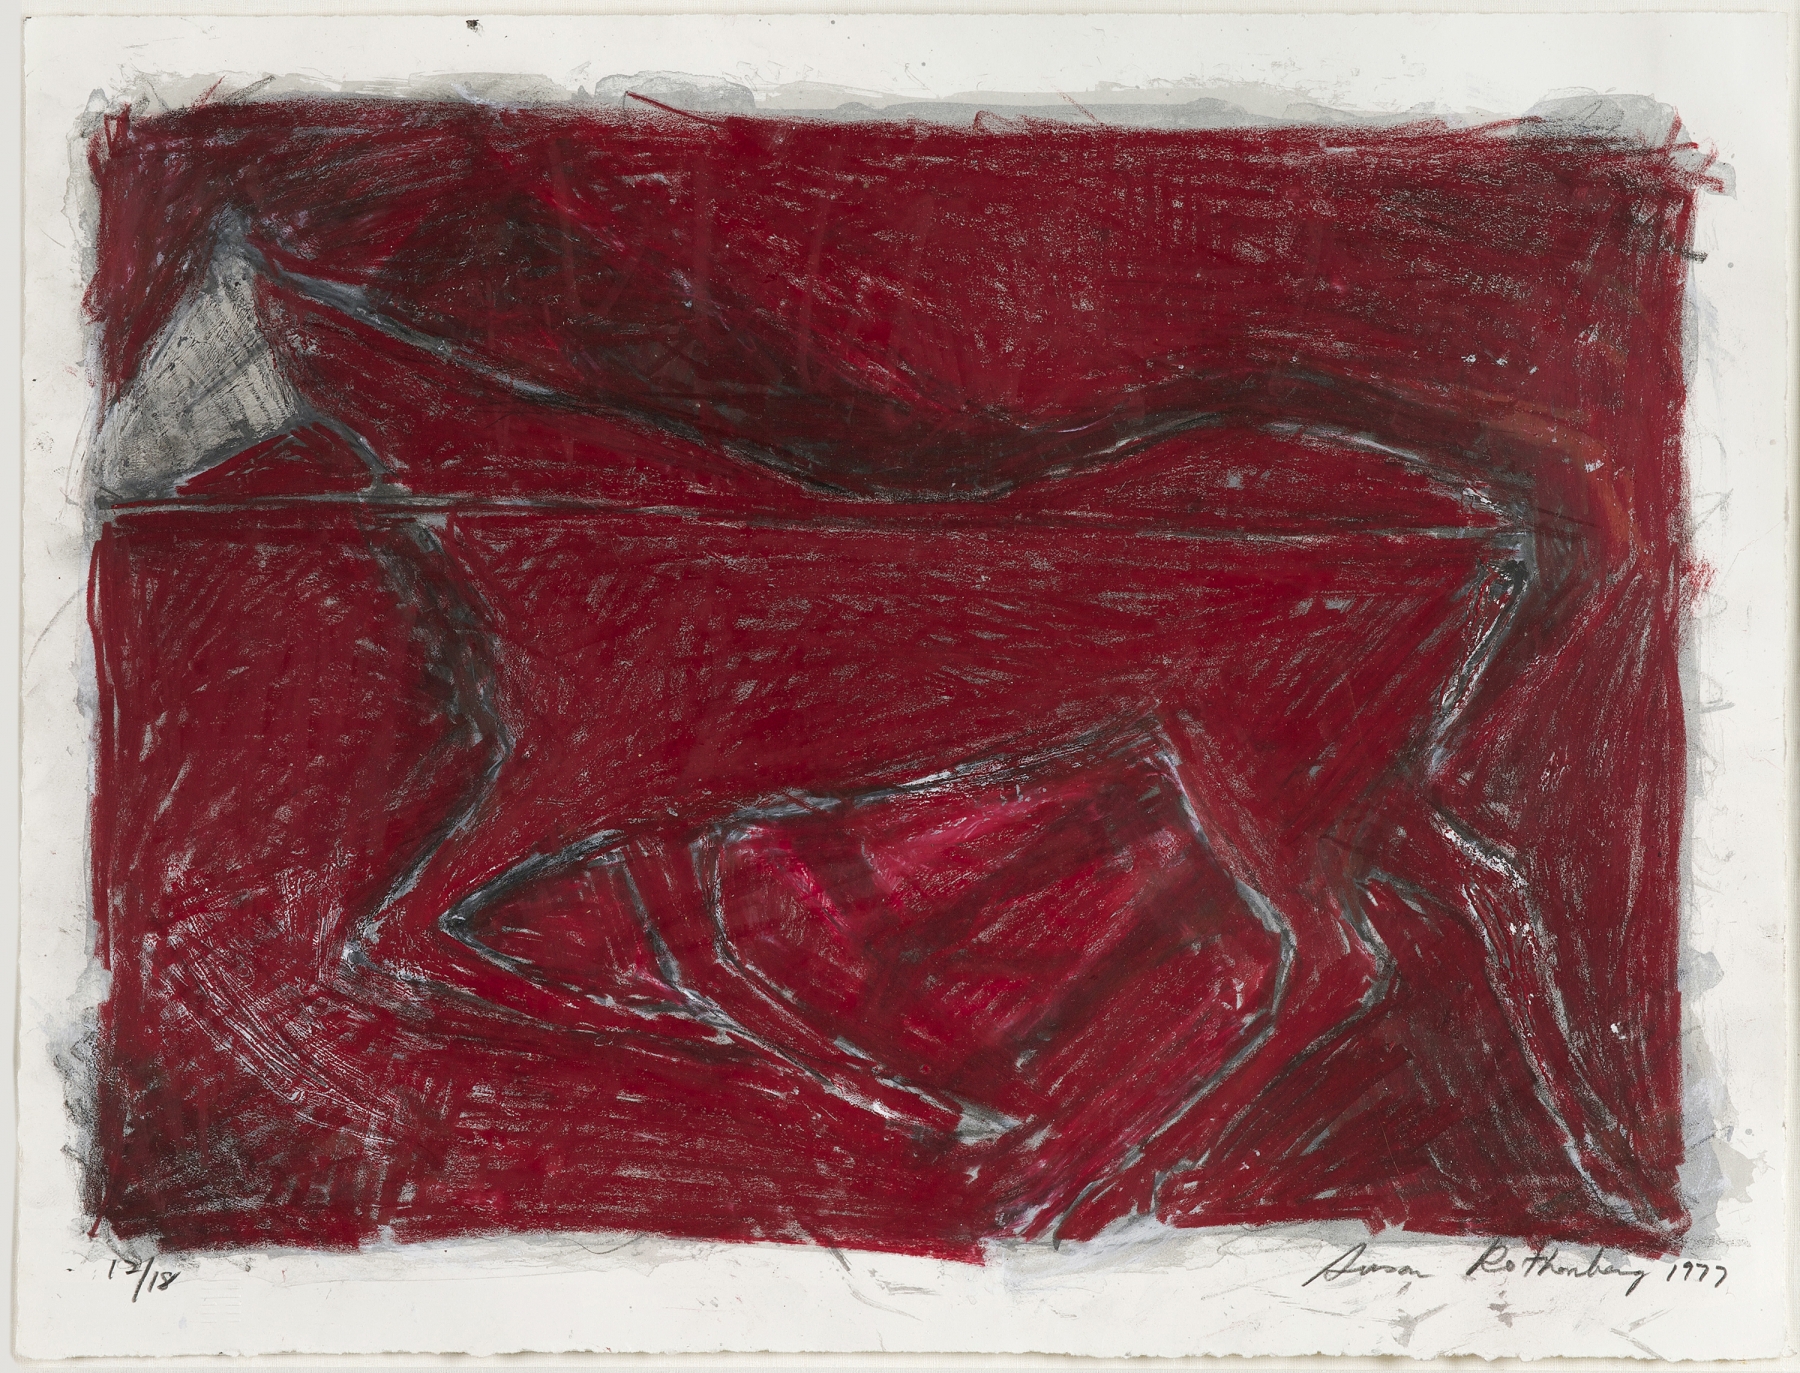 Rothenberg&nbsp;Untitled, 1977.&nbsp;Hand additions in mixed media over lithograph,&nbsp;12 x 15 inches
&nbsp;